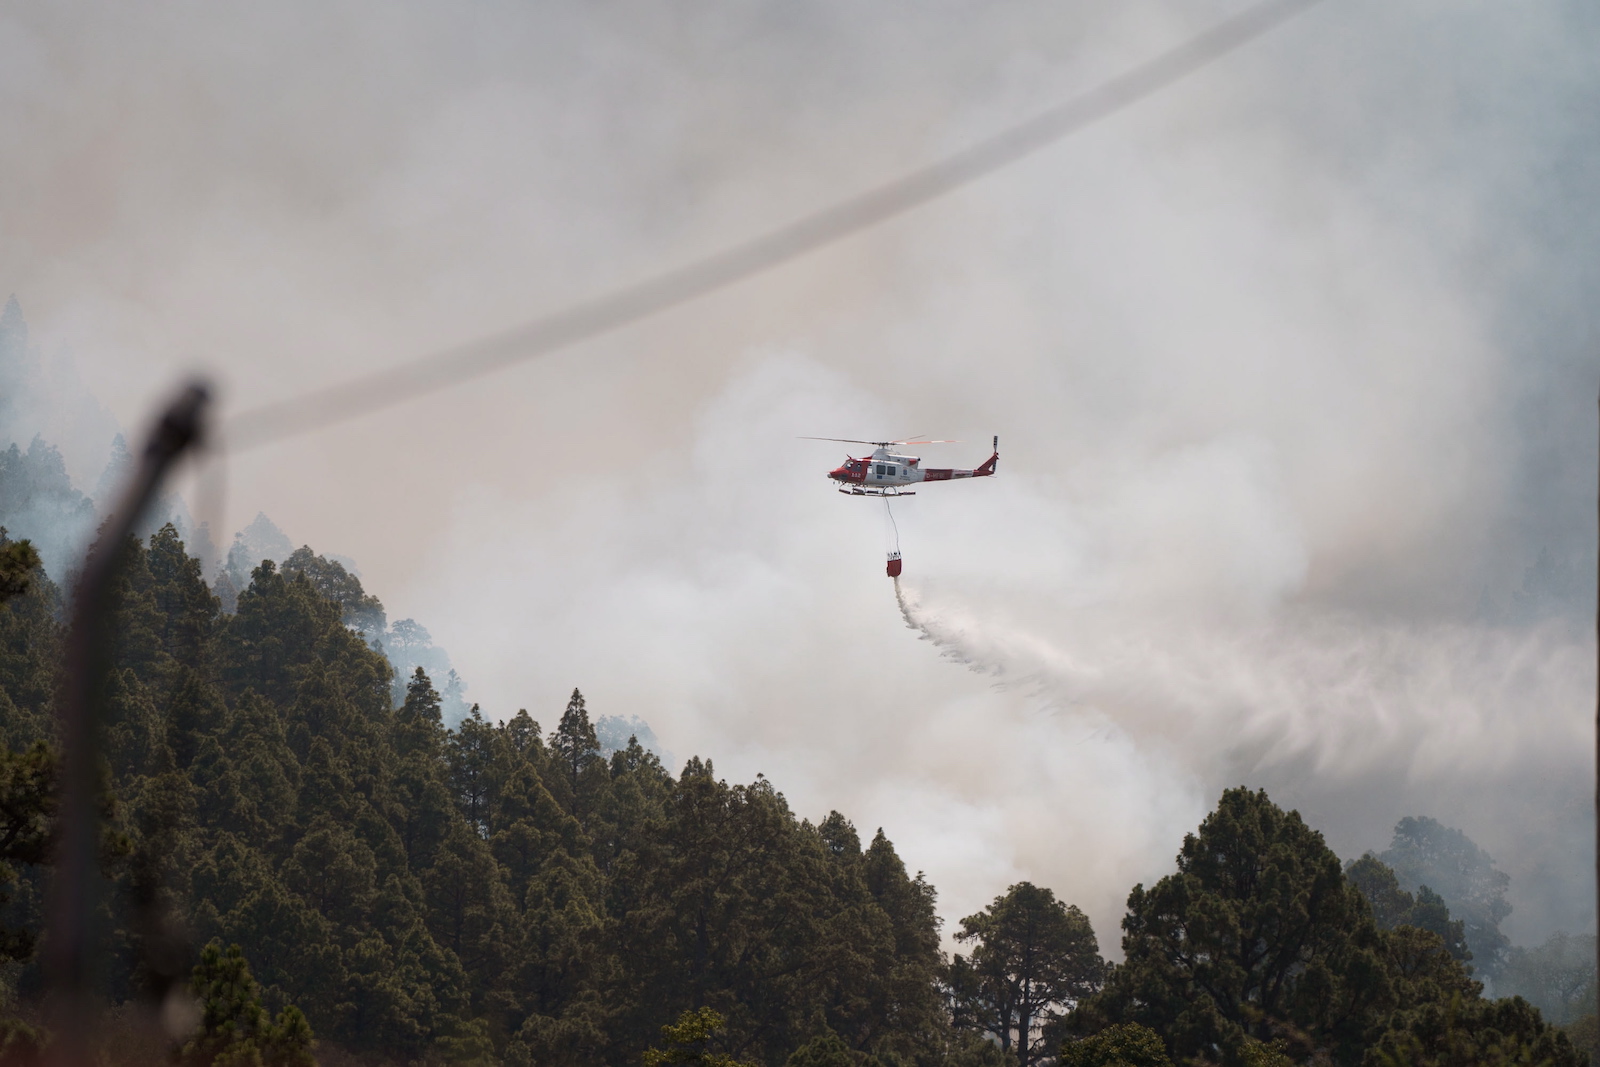 epa10805597 Helicopters work to extinguish a forest fire burning out of control in the area of La Orotava, Spain, 18 August 2023. The fire, first detected on 15 August, had already burnt over 3,500 hectares of land within a 42-kilometer radius, forcing inhabitants from nearby areas to stay confined in their homes or even evacuate.  EPA/RAMON DE LA ROCHA